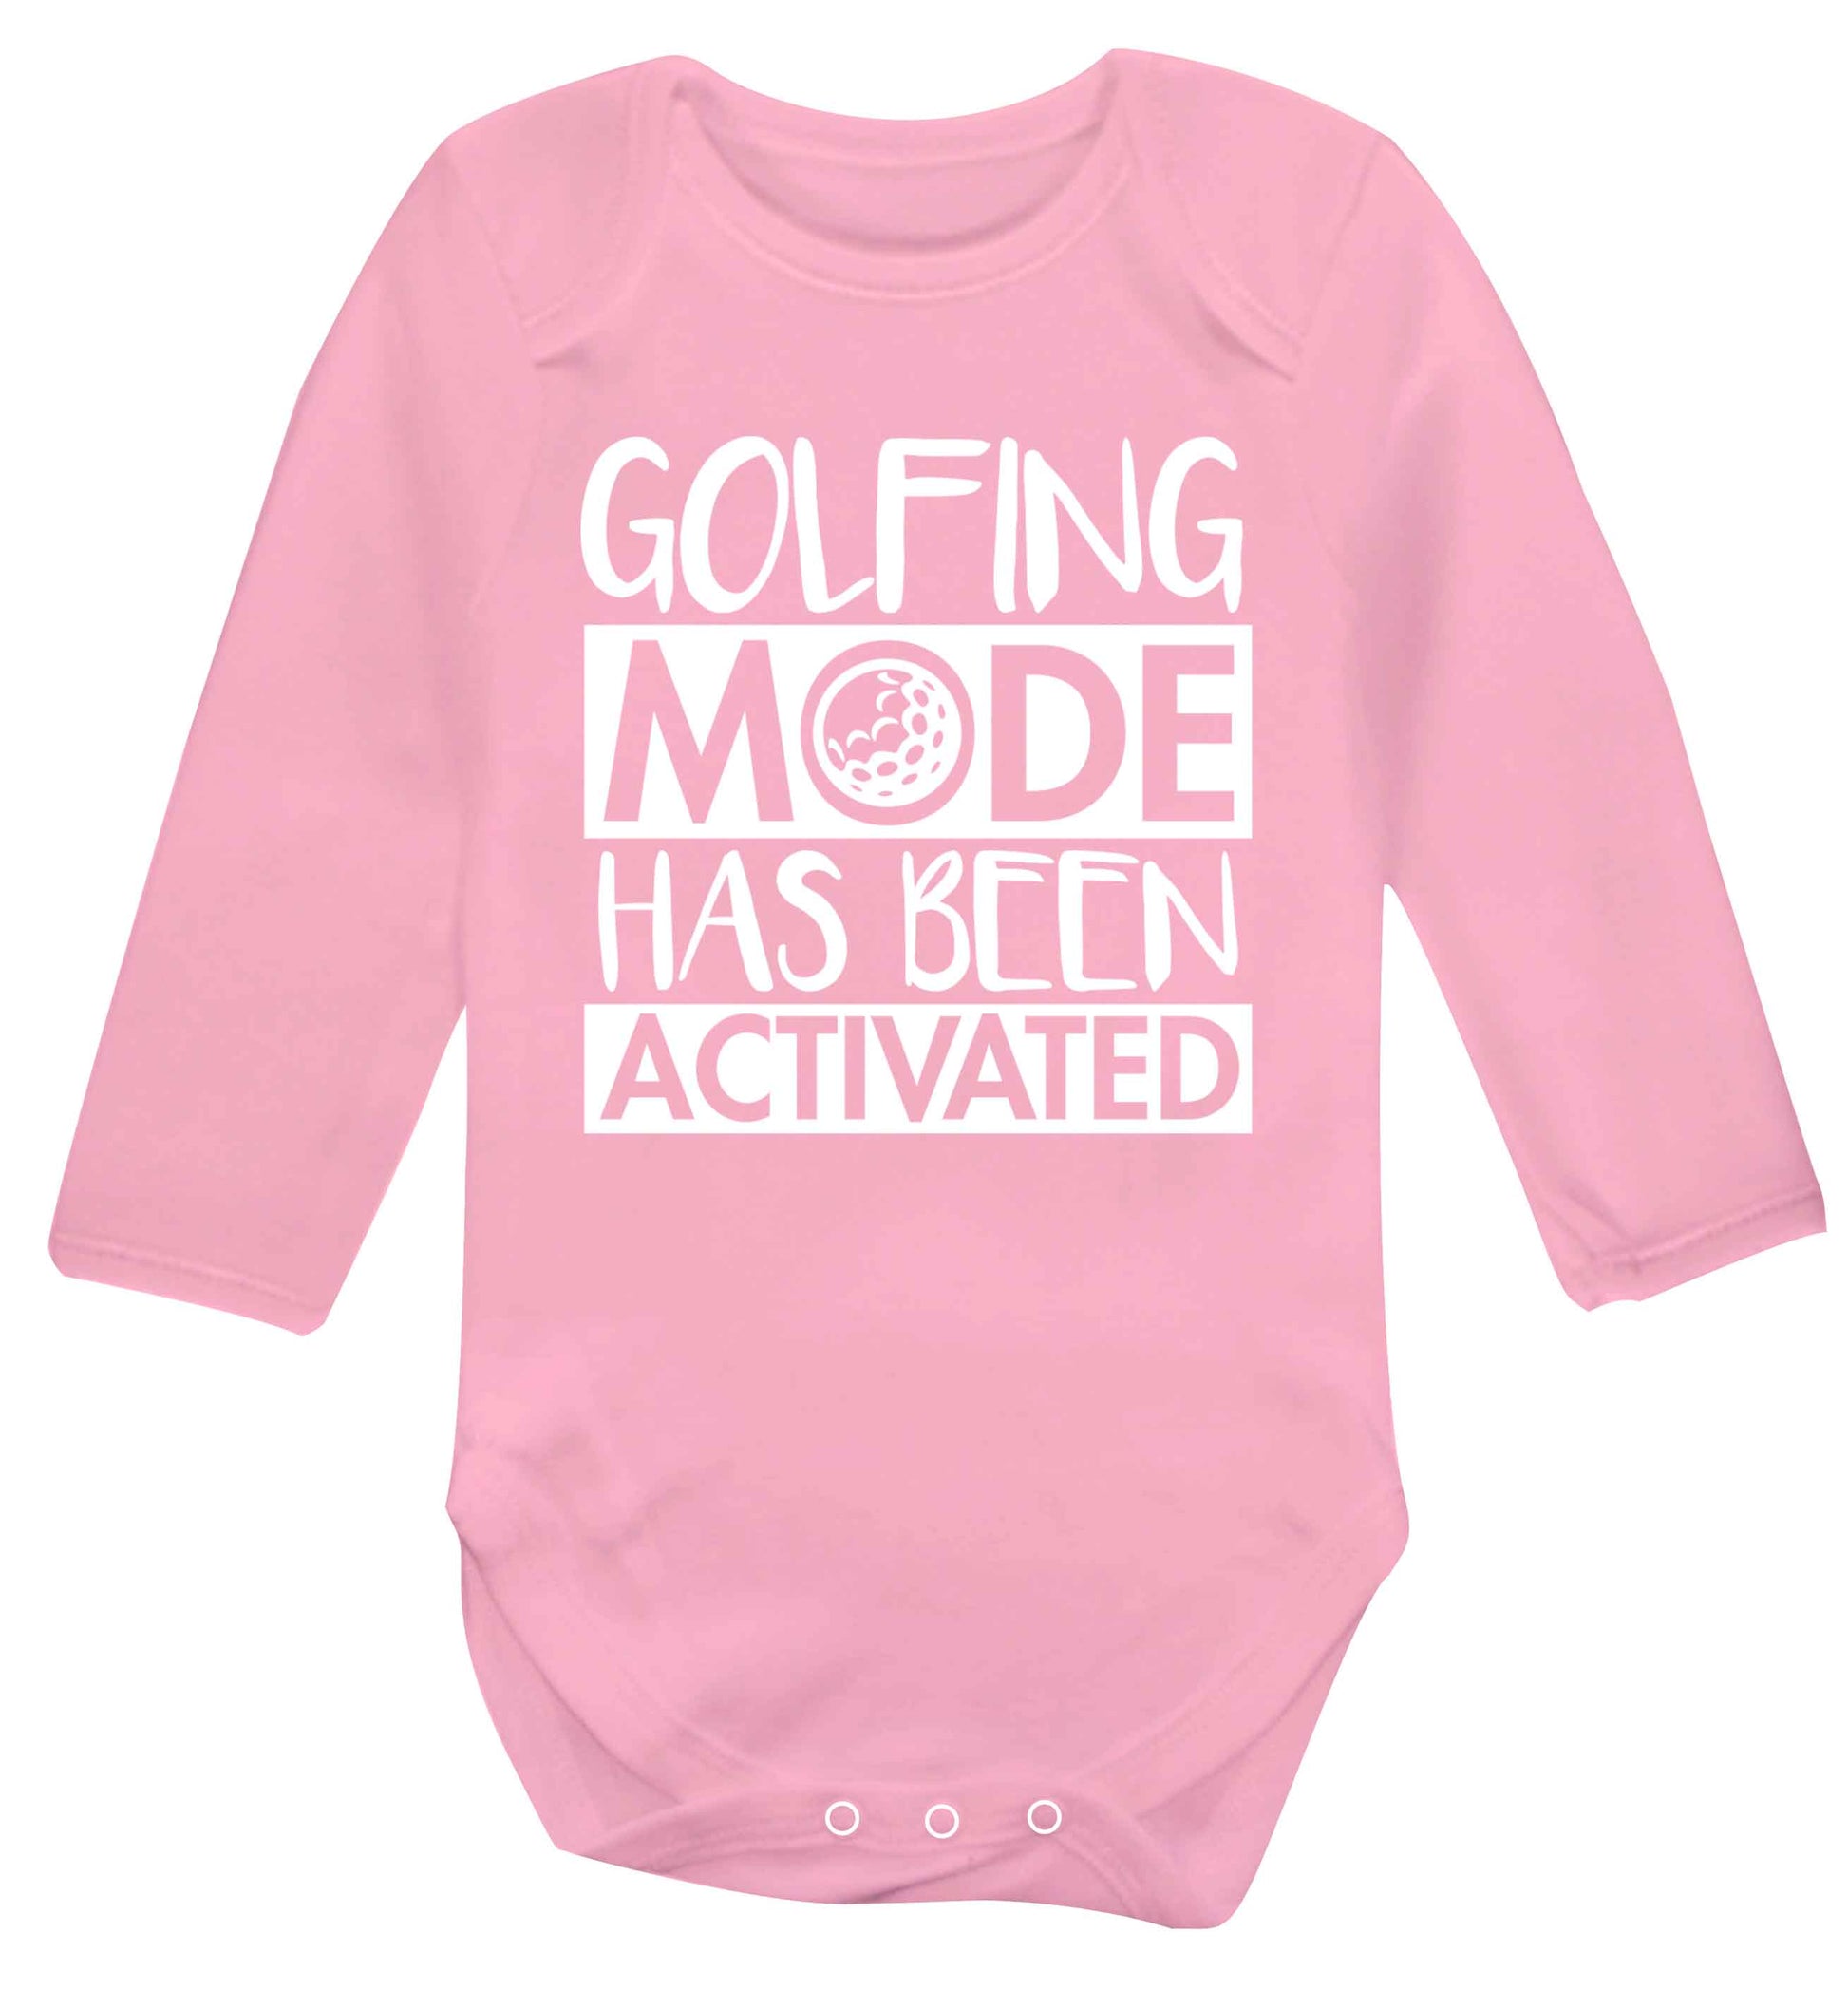 Golfing mode has been activated Baby Vest long sleeved pale pink 6-12 months